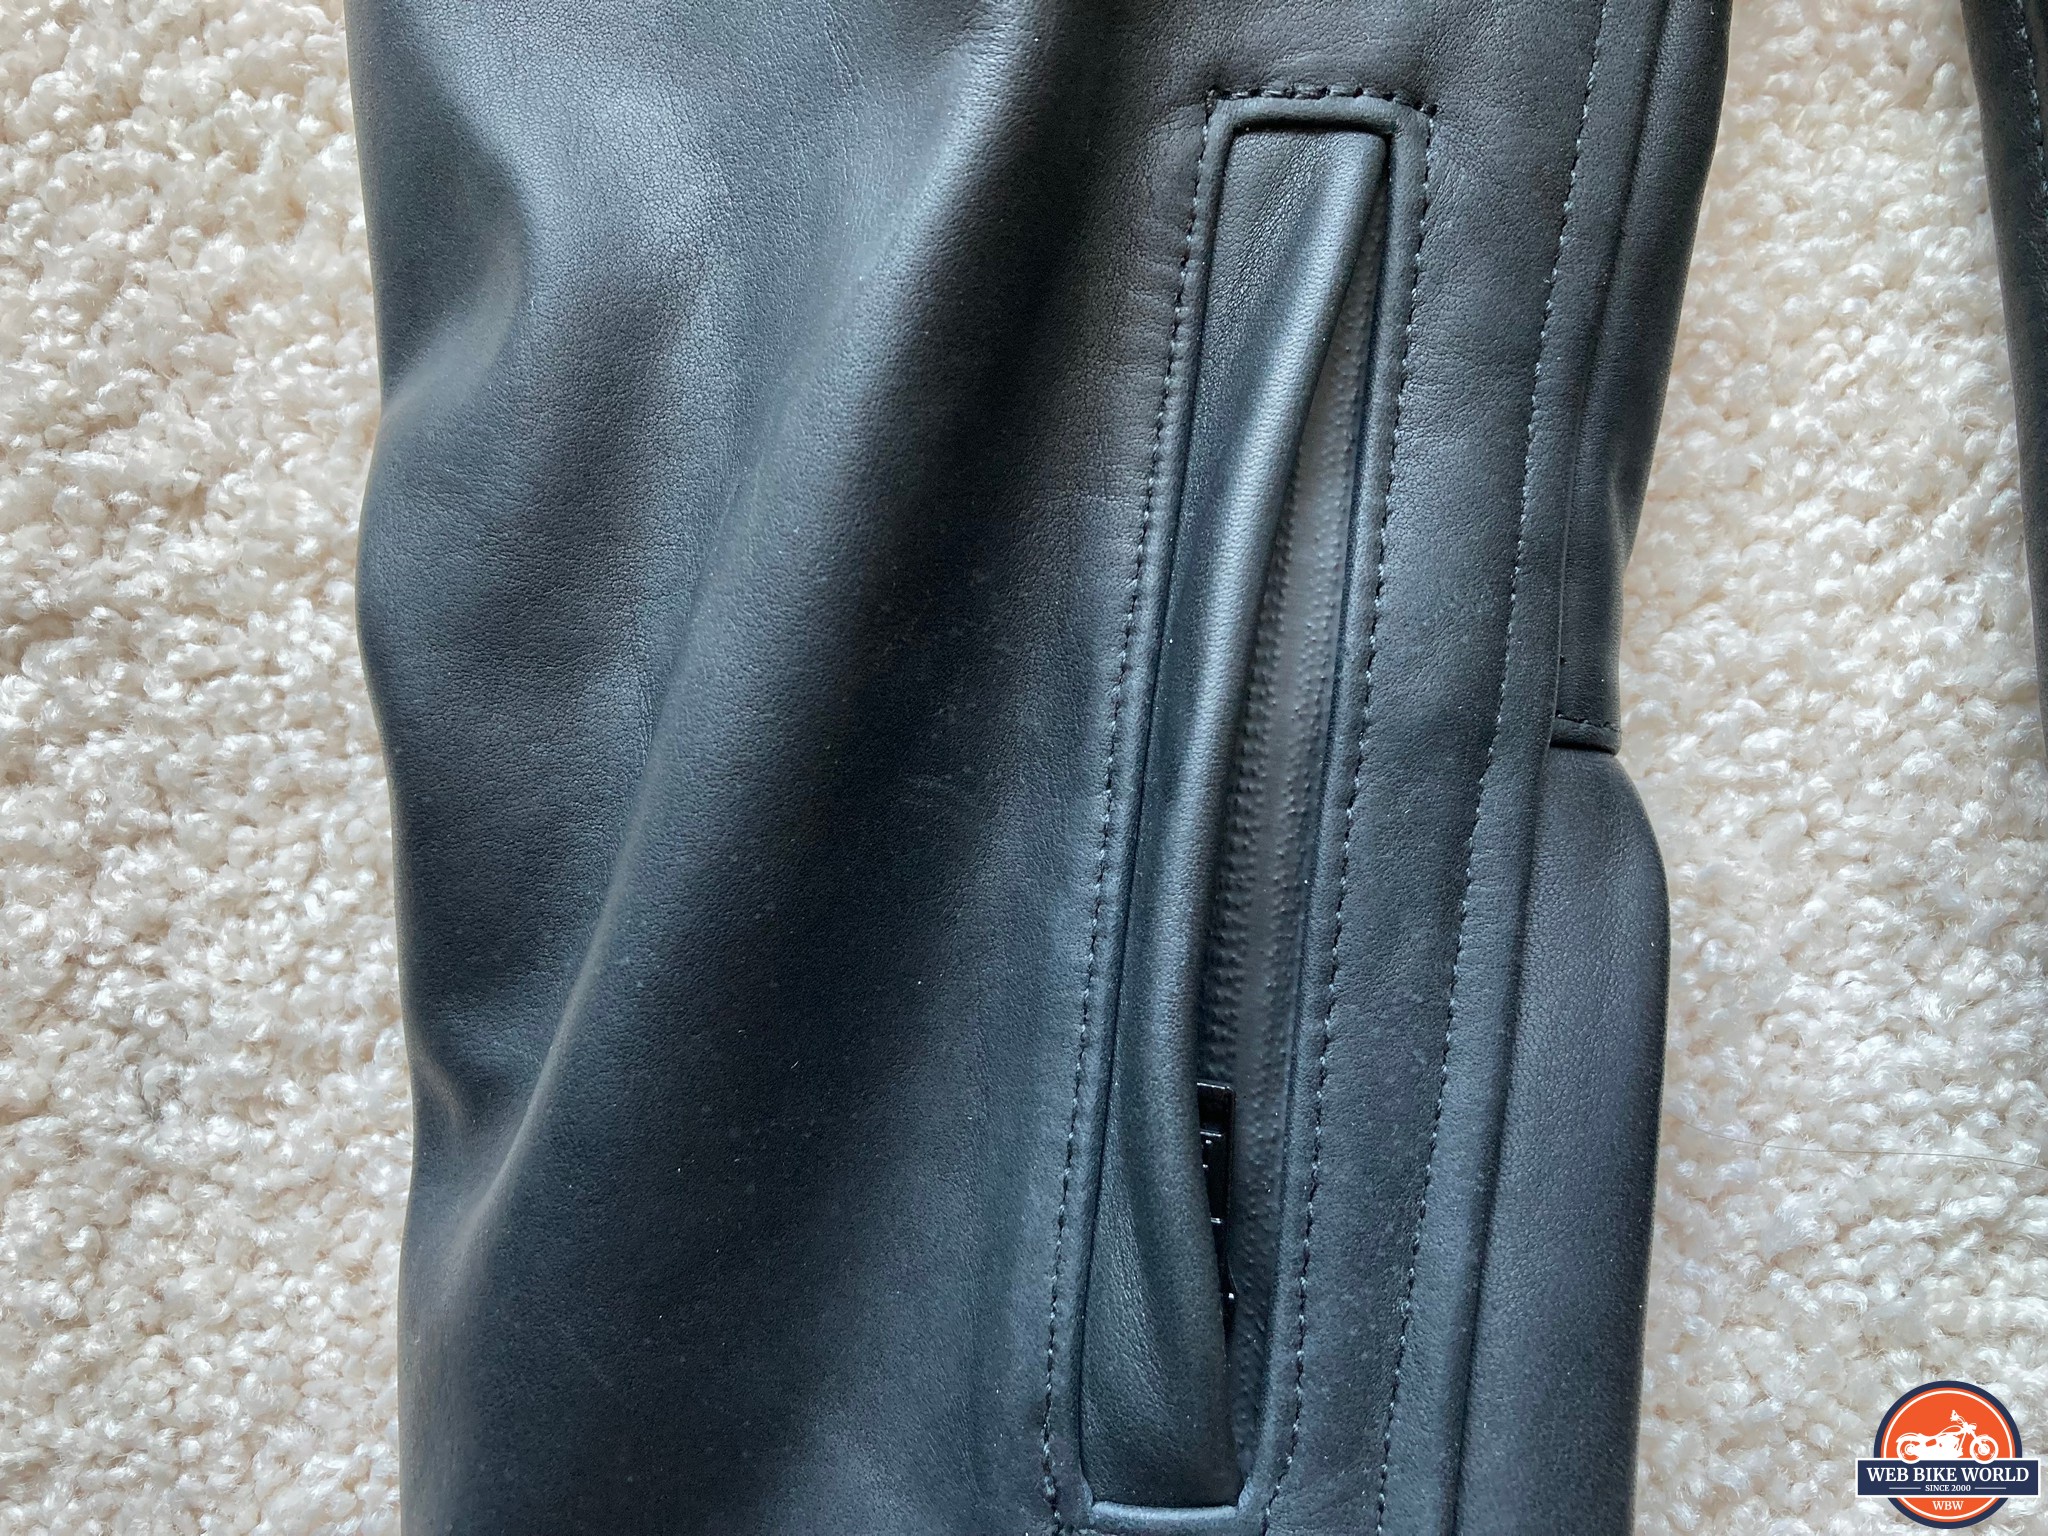 Small zippered pocket on the right front sleeve